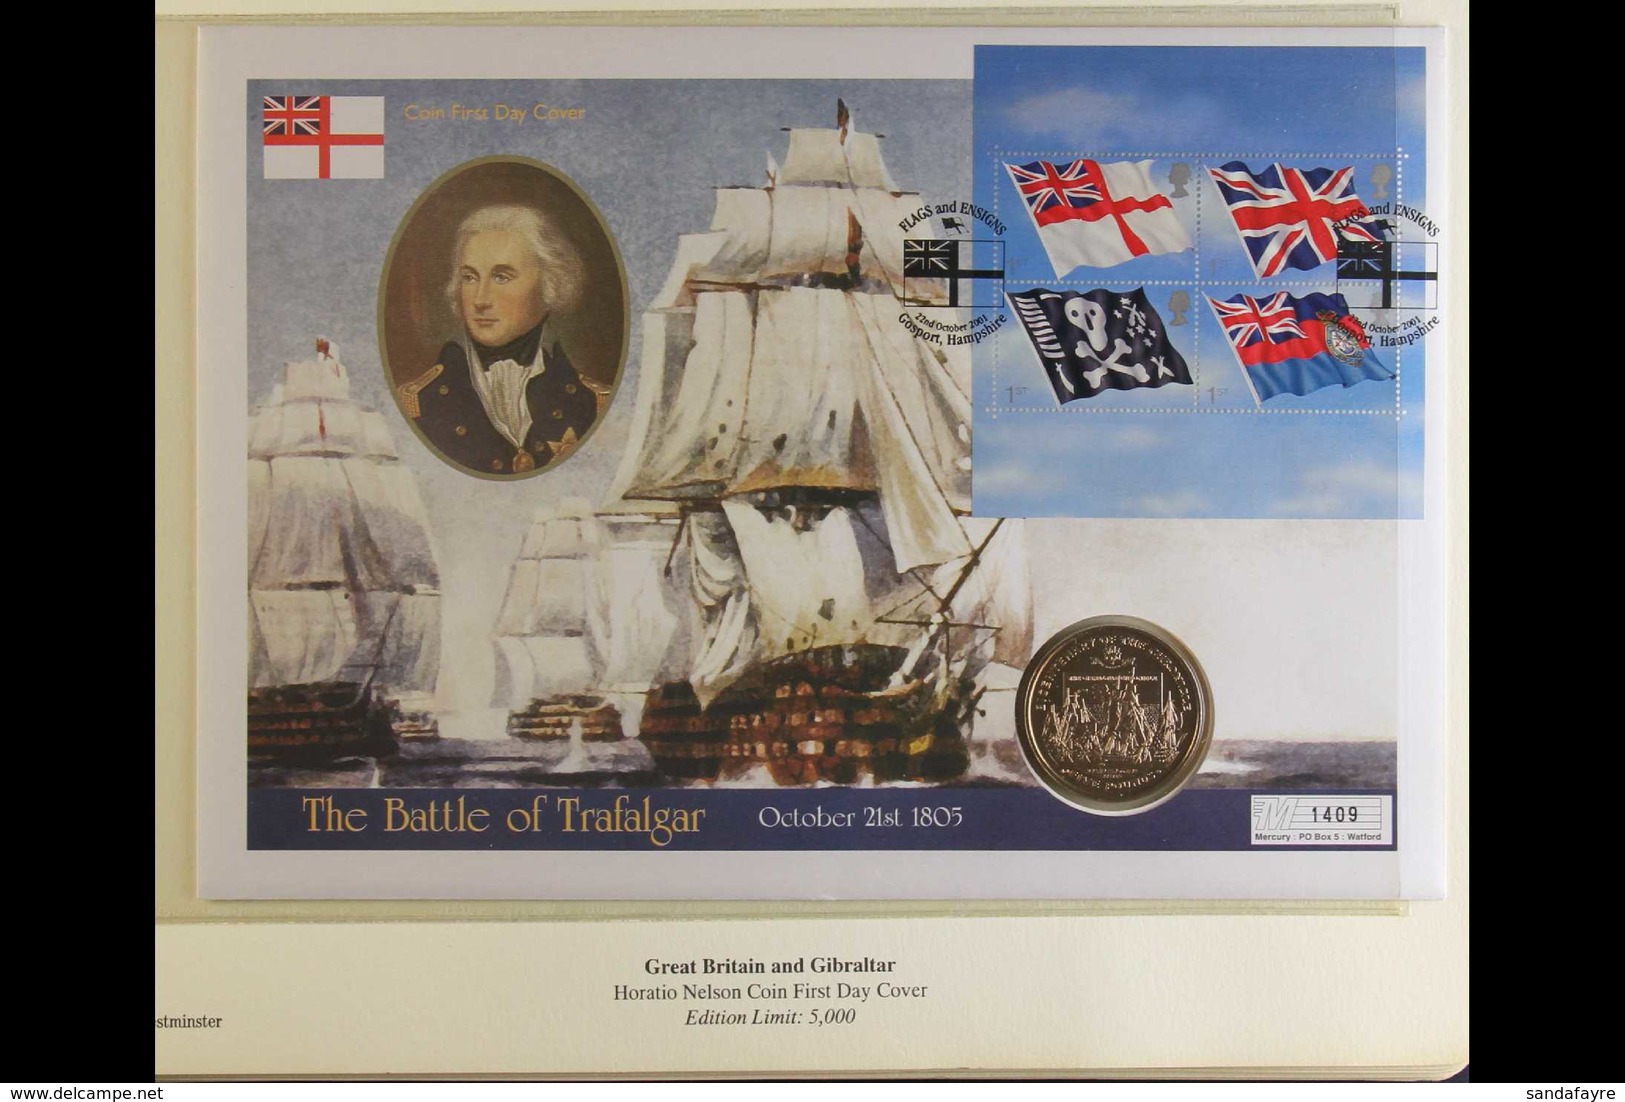 SHIPS - ROYAL NAVY 2001 Westminster Collection Of All Different British Commonwealth Illustrated Unaddressed First Day C - Ohne Zuordnung